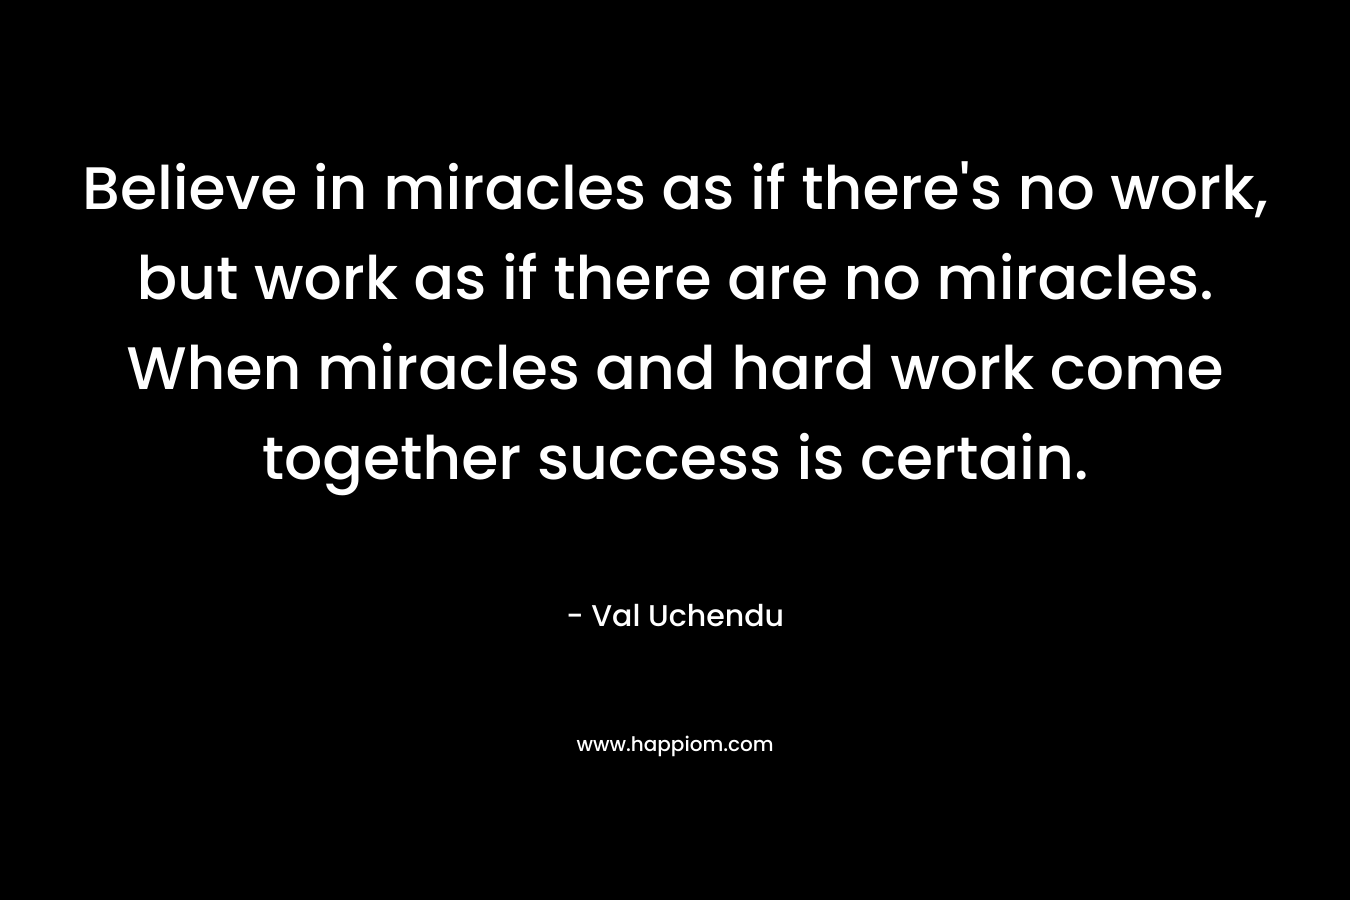 Believe in miracles as if there's no work, but work as if there are no miracles. When miracles and hard work come together success is certain.